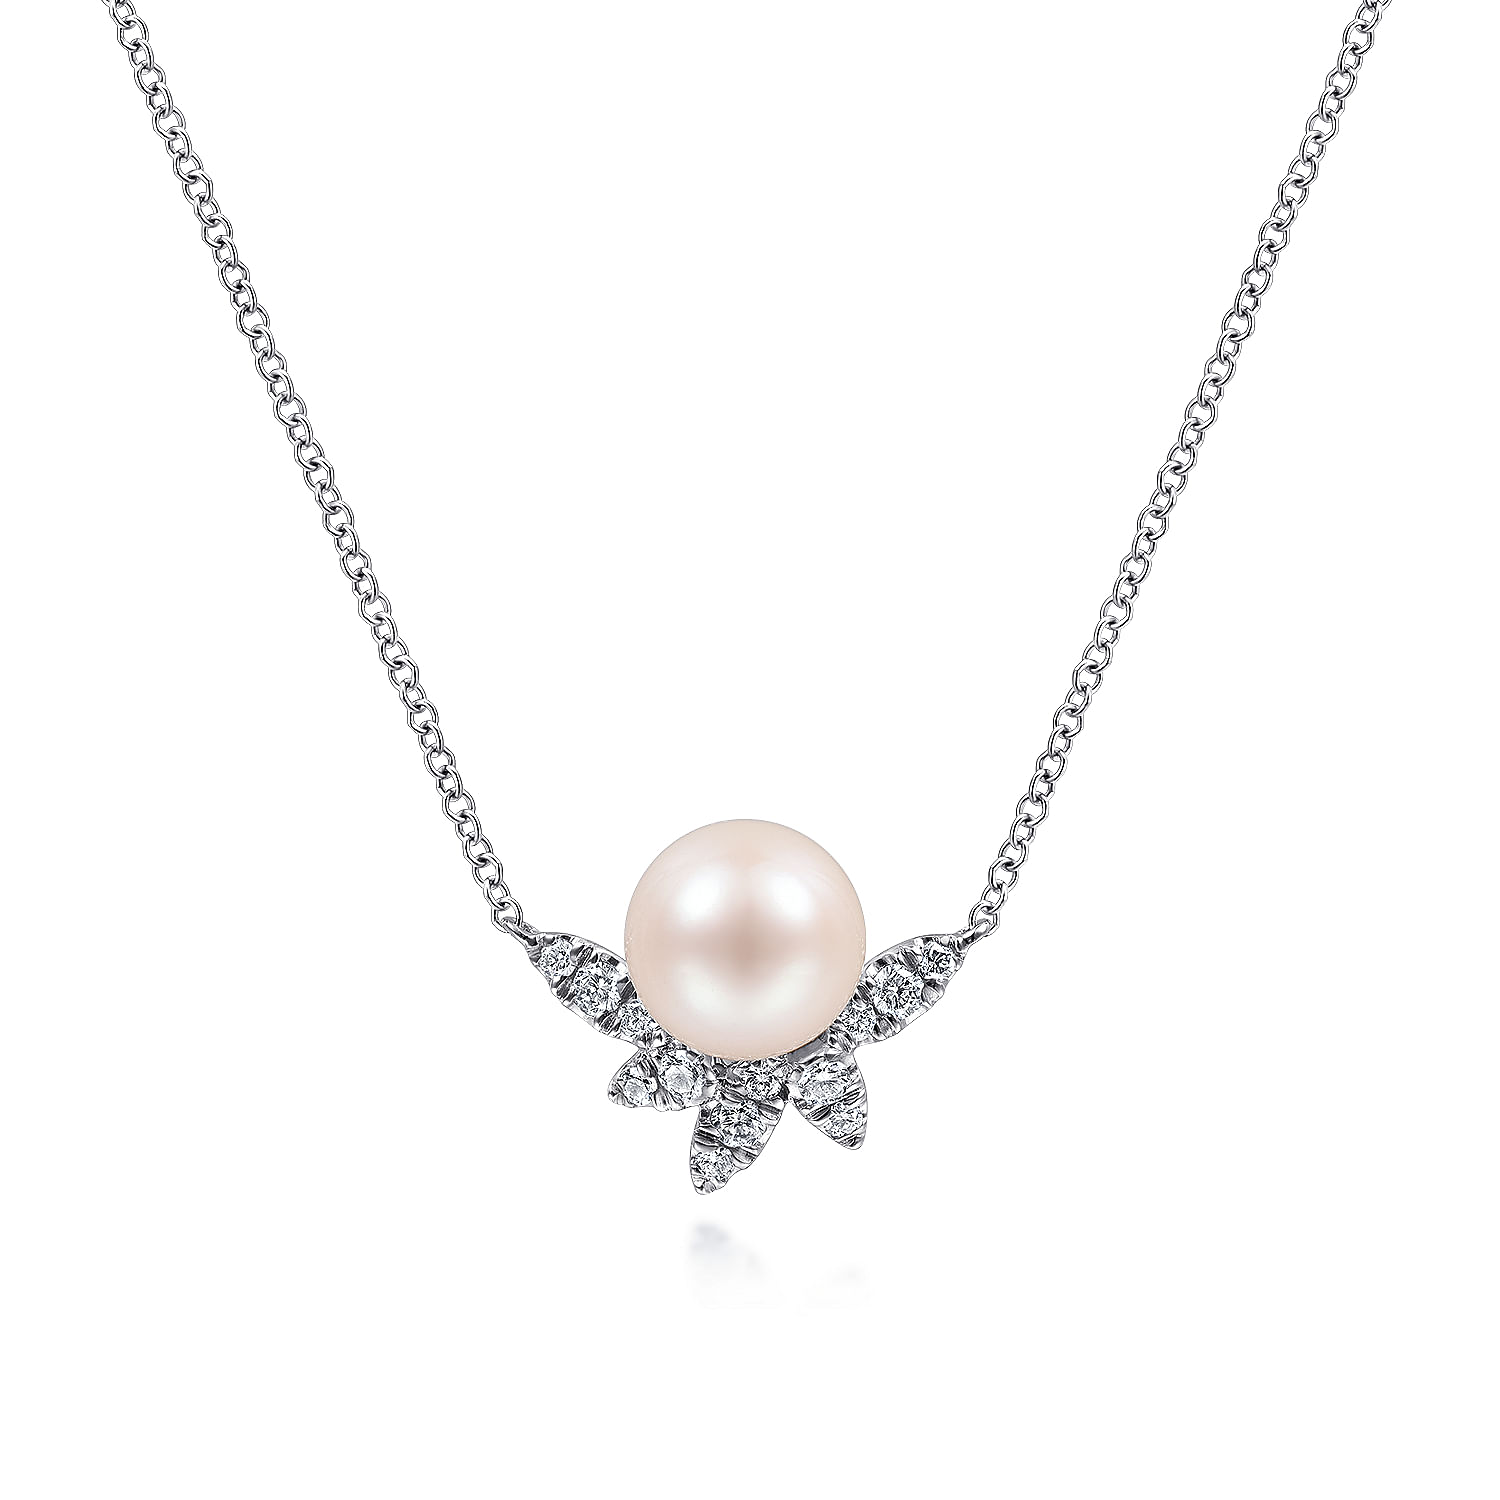 Gabriel - 14K White Gold Pearl and Diamond Necklace